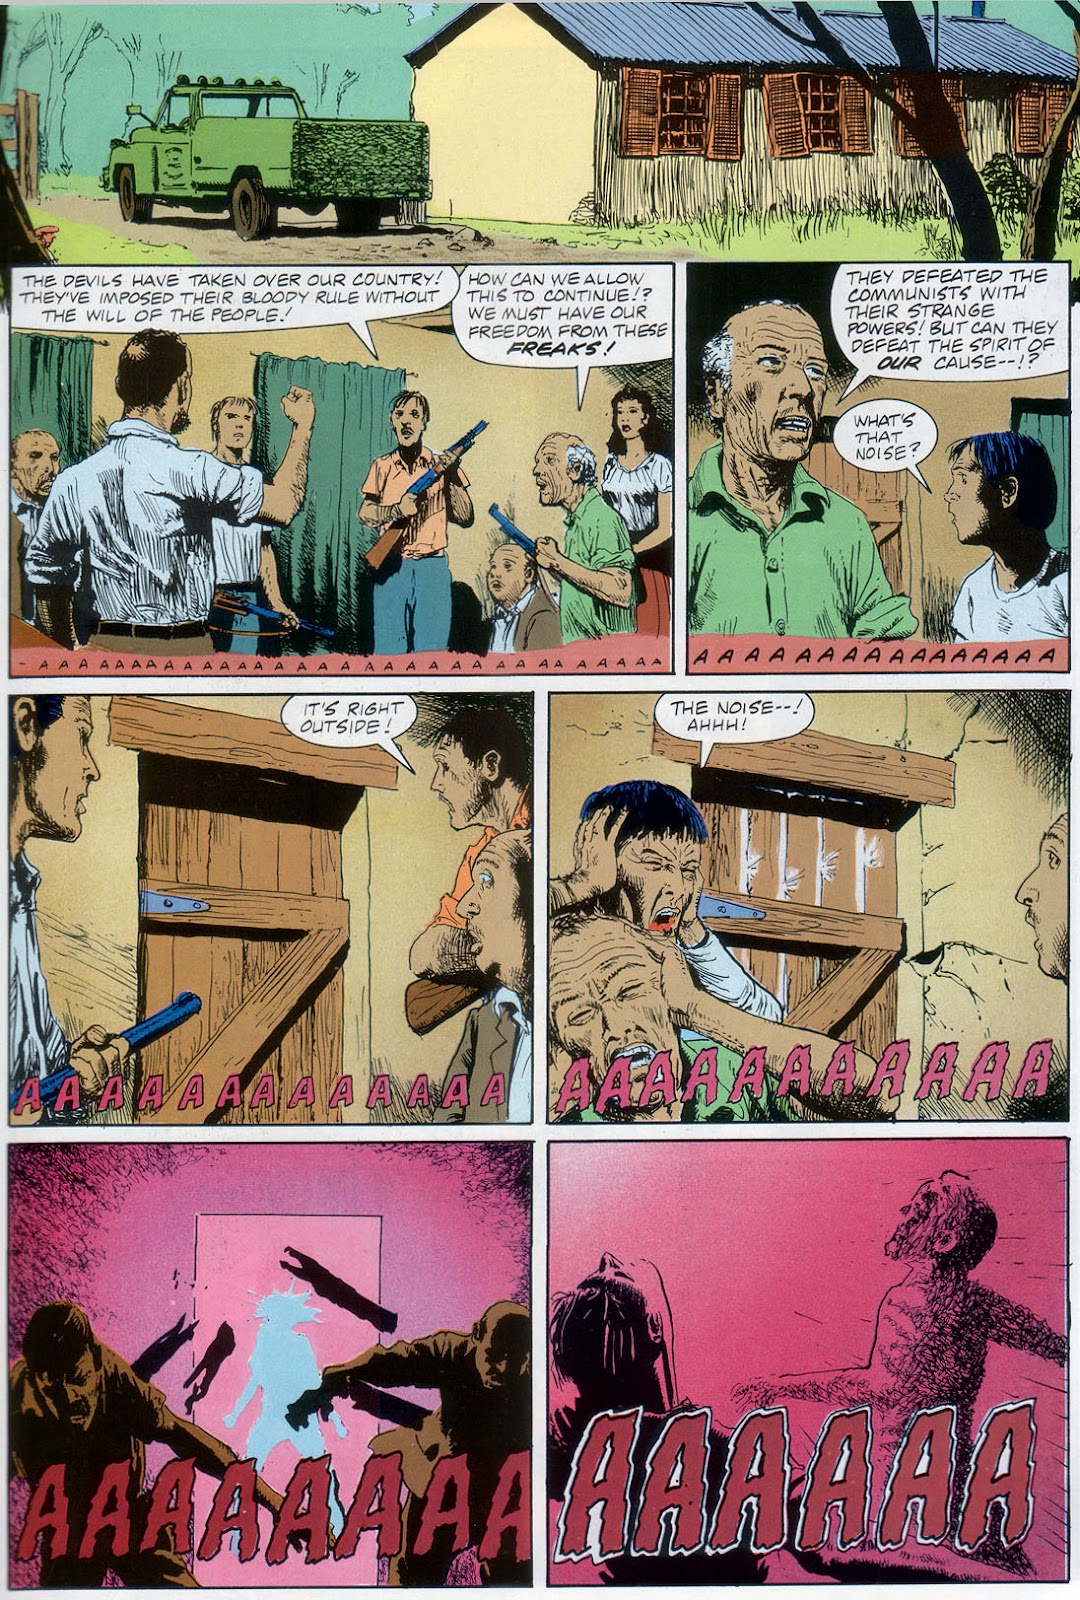 Marvel Graphic Novel issue 57 - Rick Mason - The Agent - Page 35